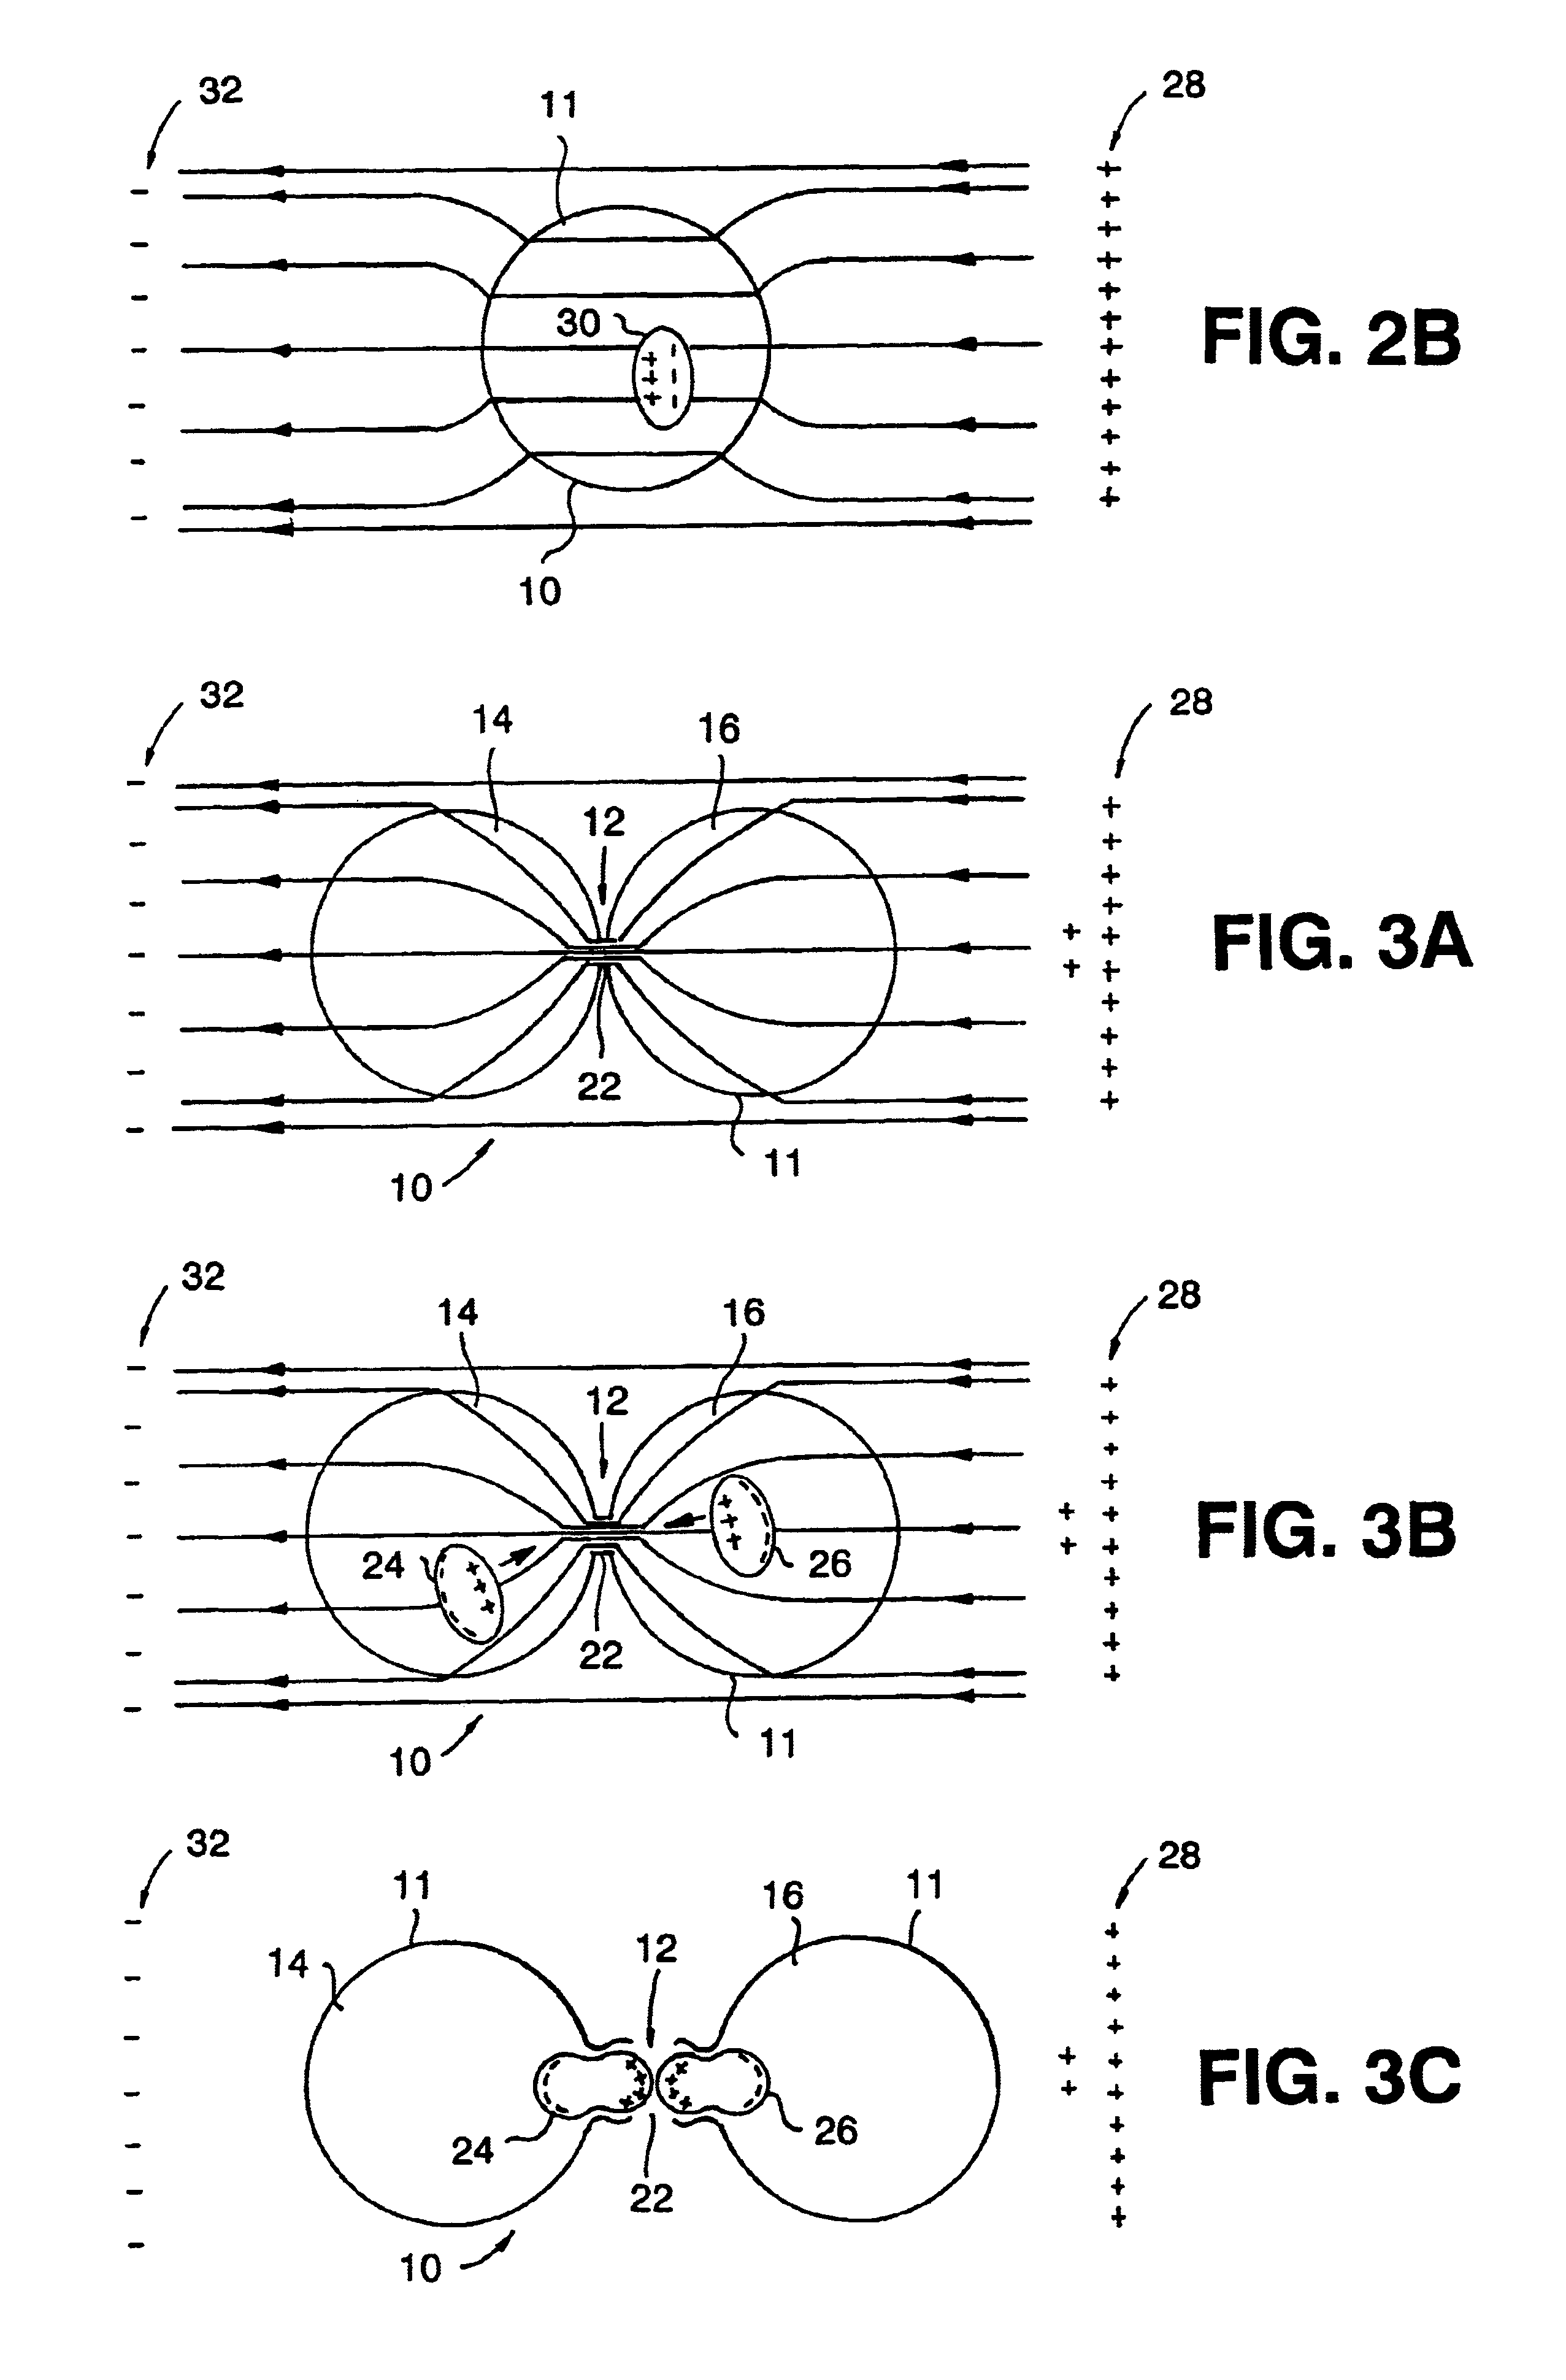 Apparatus for treating a tumor or the like and articles incorporating the apparatus for treatment of the tumor